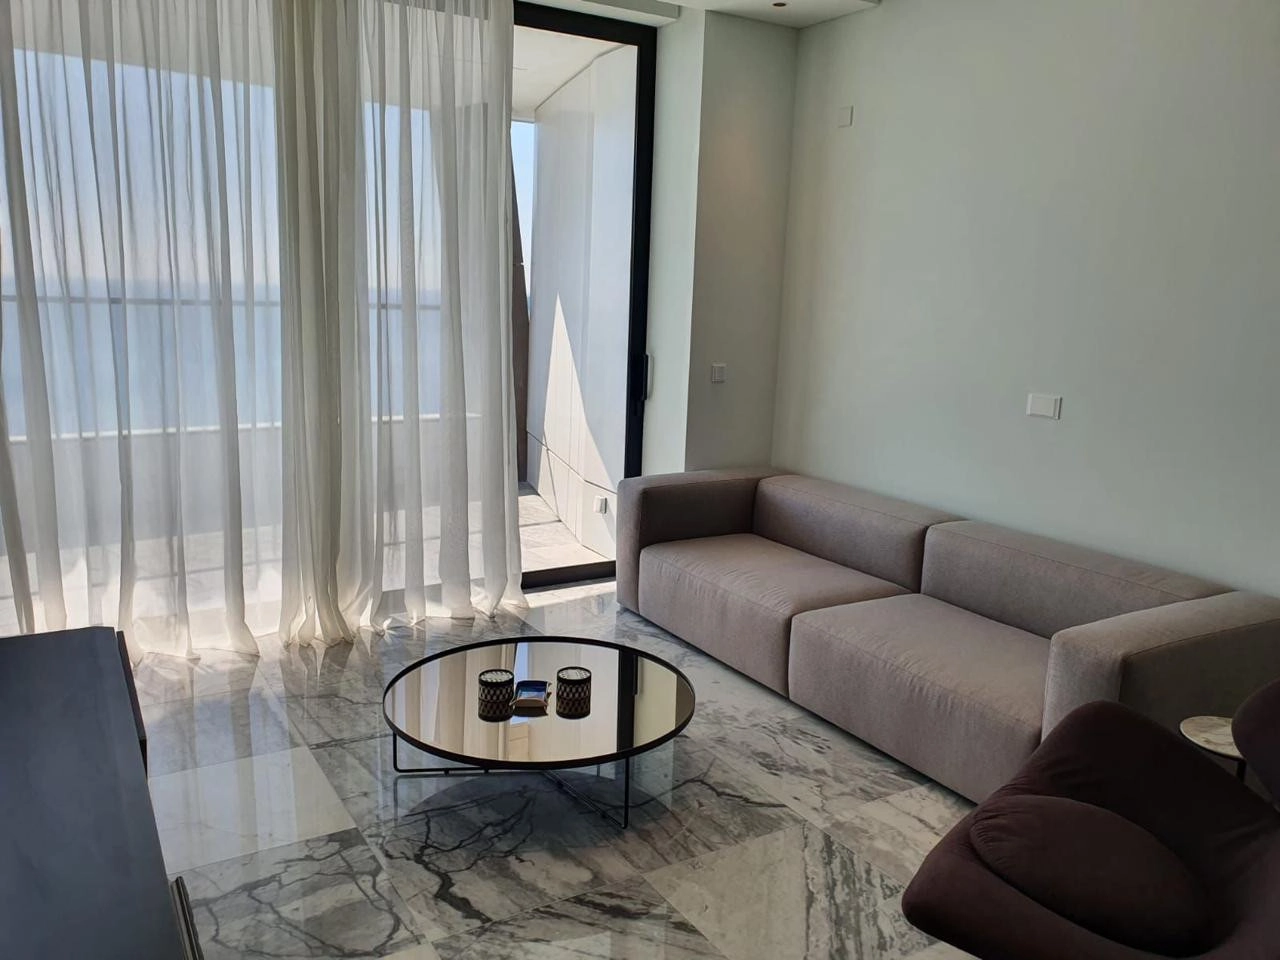 2 Bedroom Apartment for Rent in Limassol